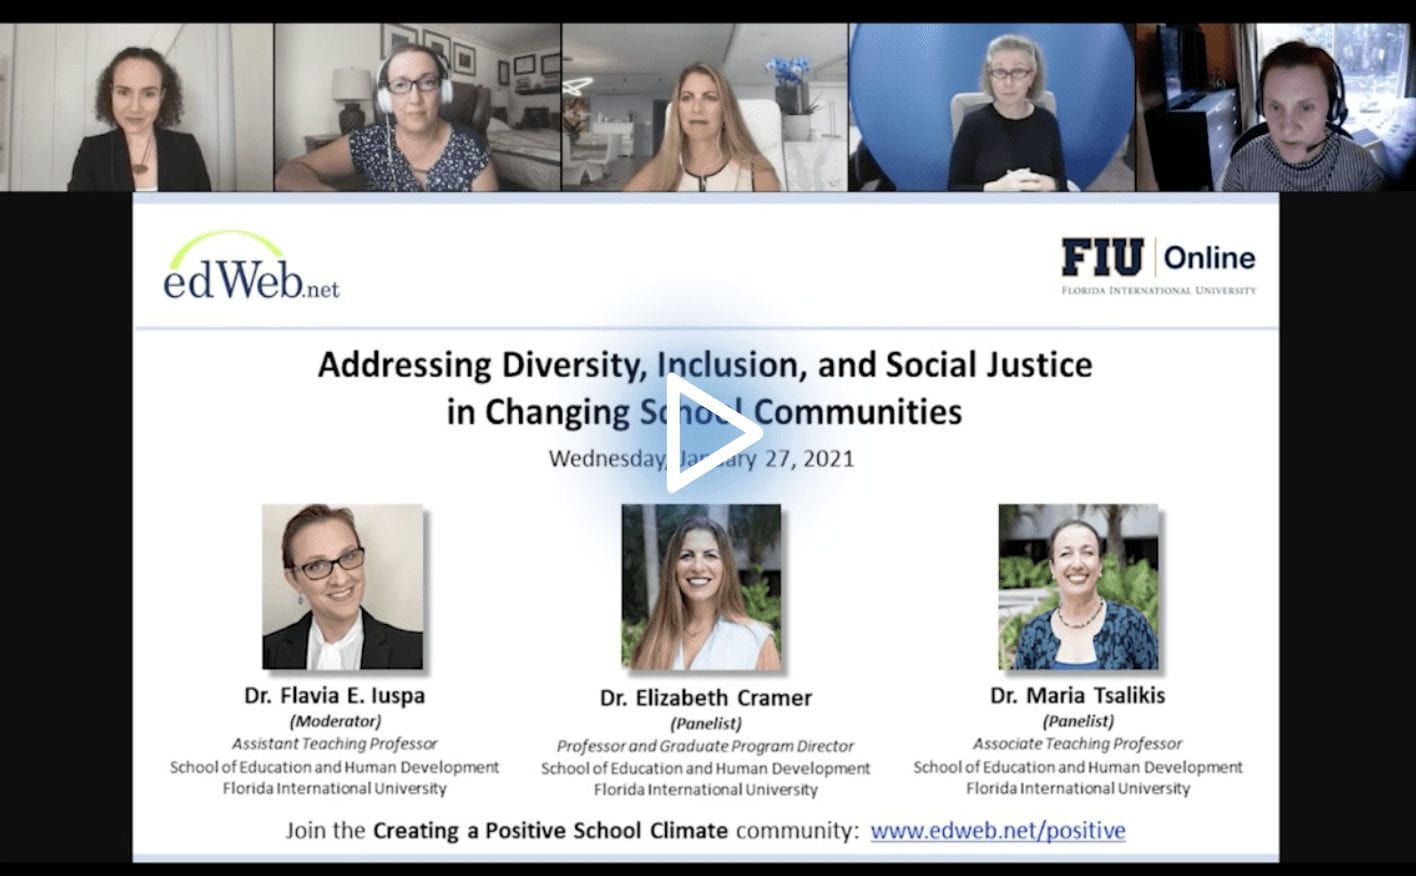 Addressing Diversity, Inclusion, and Social Justice in Changing School Communities edWebinar recording link